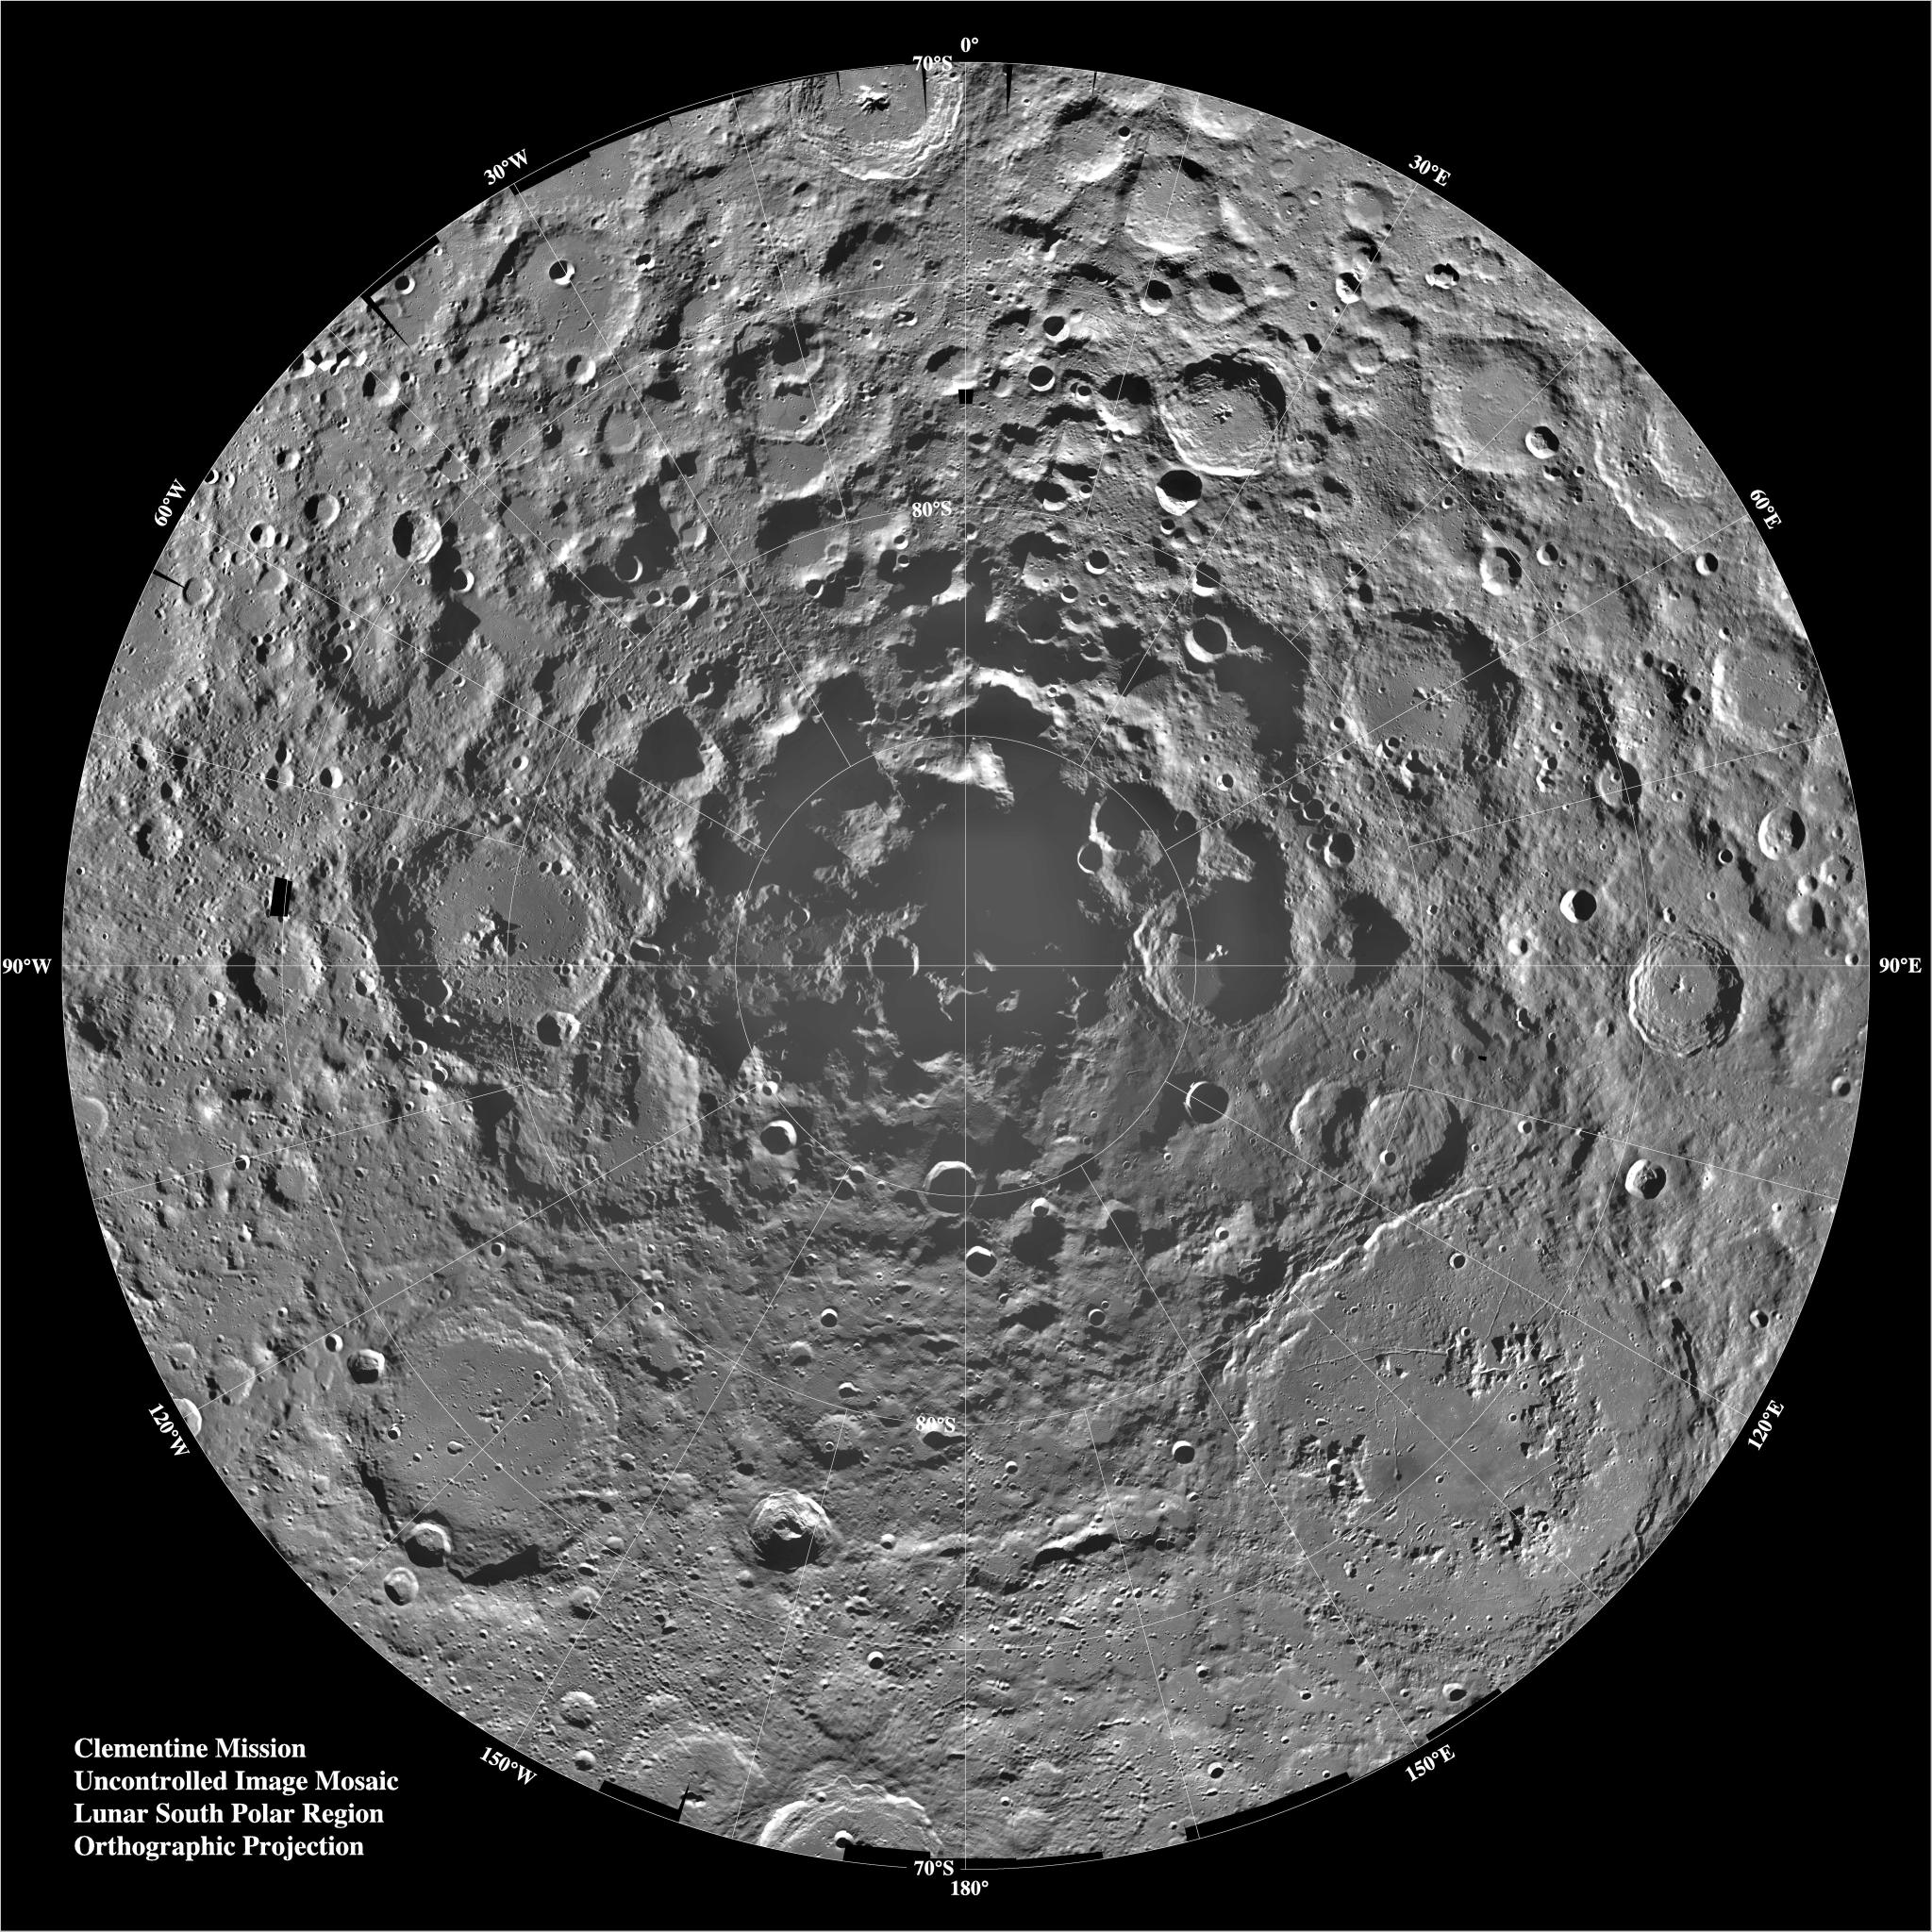 CLPS This orthographic projection is centered on the south polar region of the moon as seen by NASA's Clementine spacecraft. The Schrodinger Basin is located in the lower right of the mosaic.